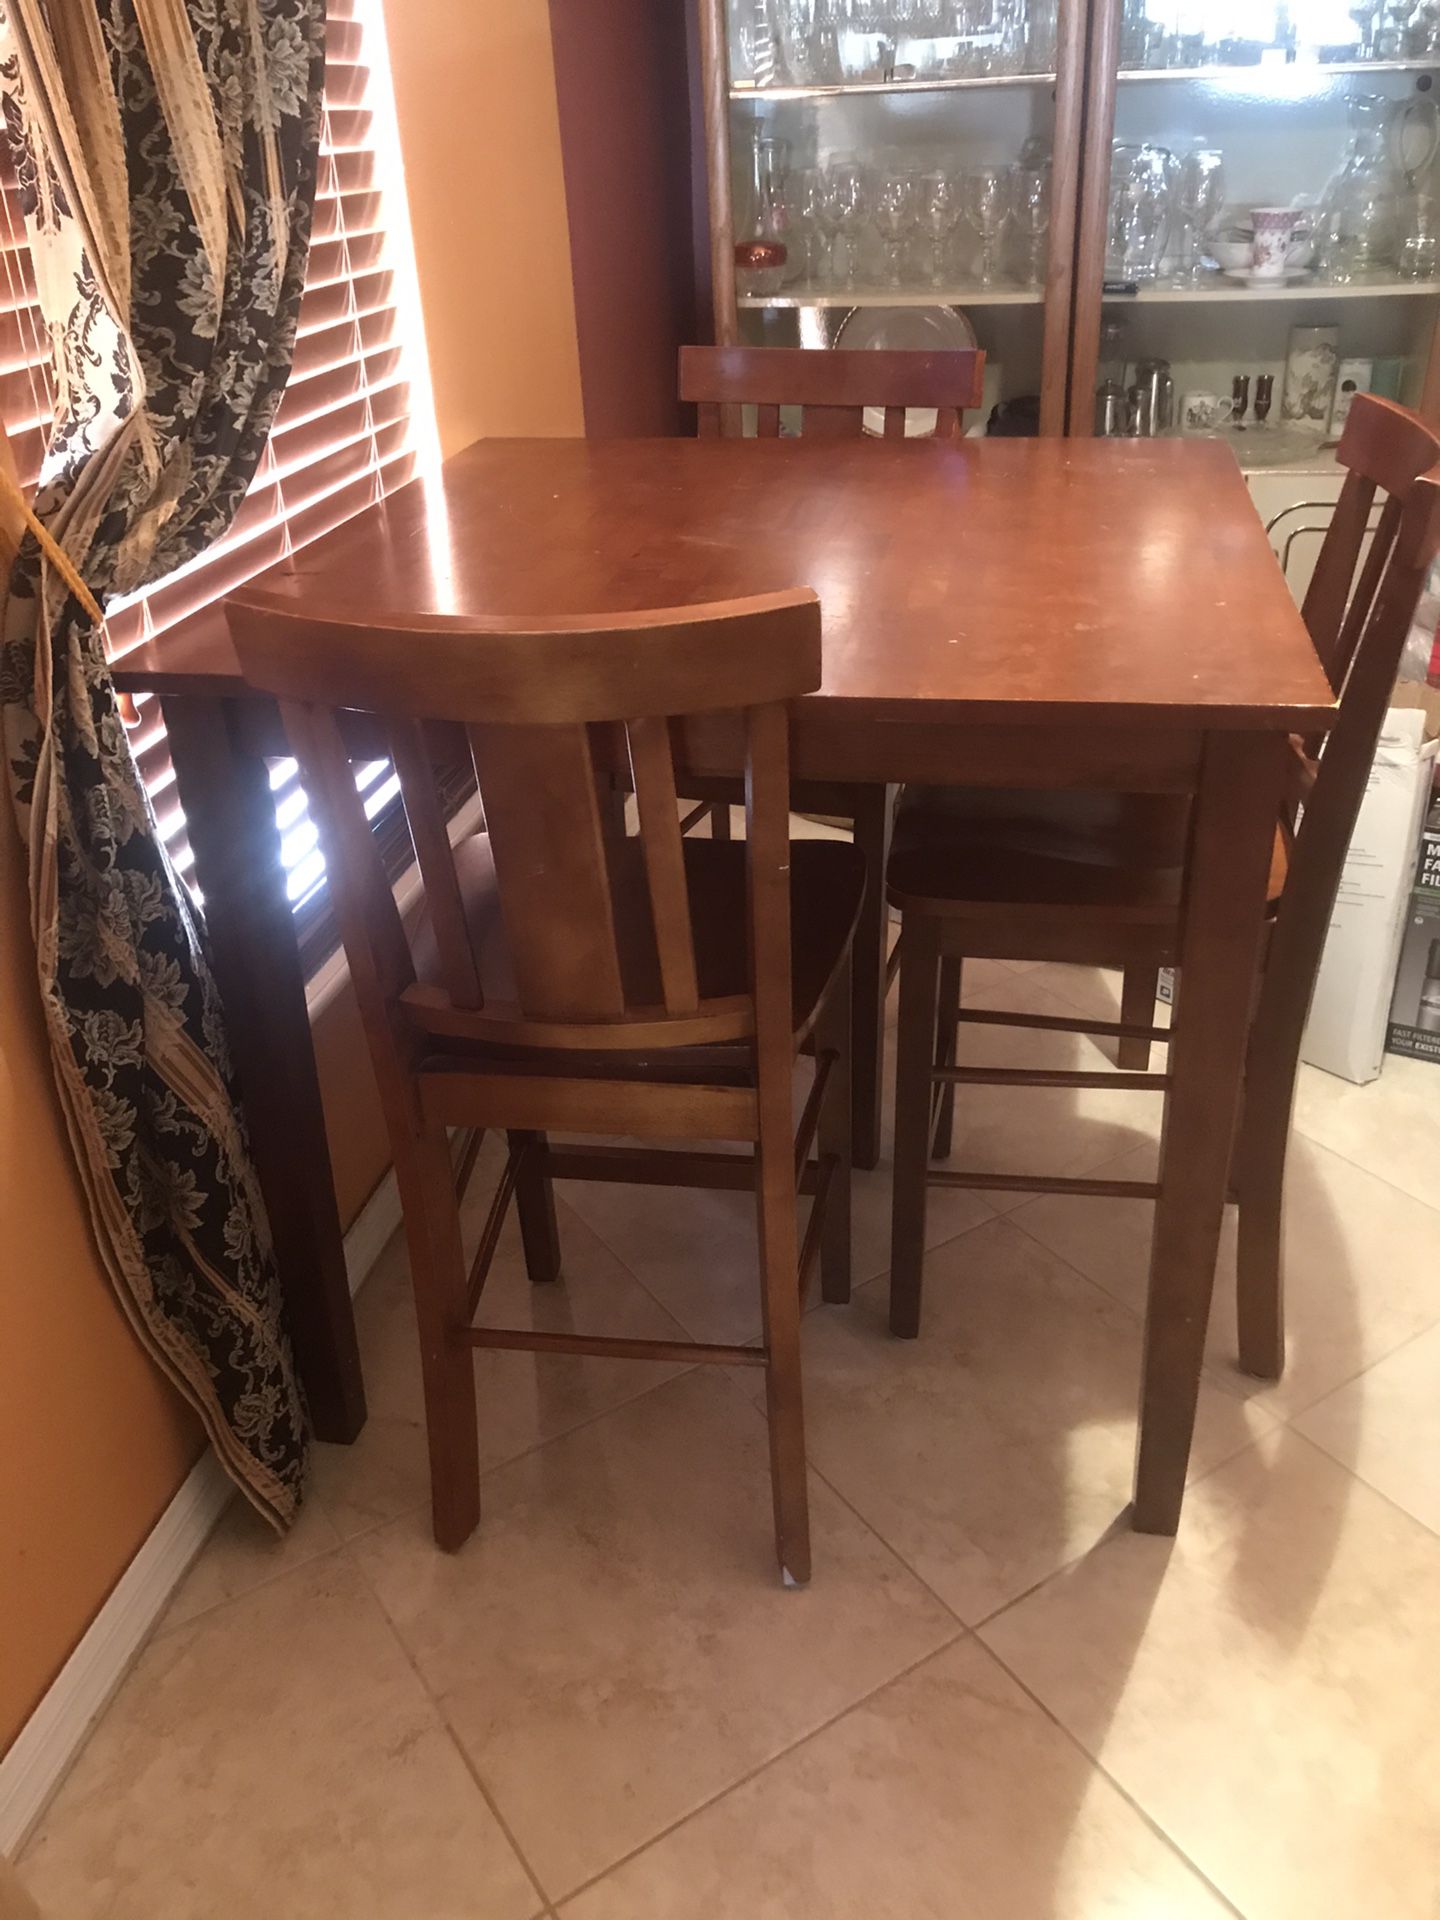  3 Chairs One High Table Set 100% ALL Wood 3ft2’ High 3ft3’Wide 